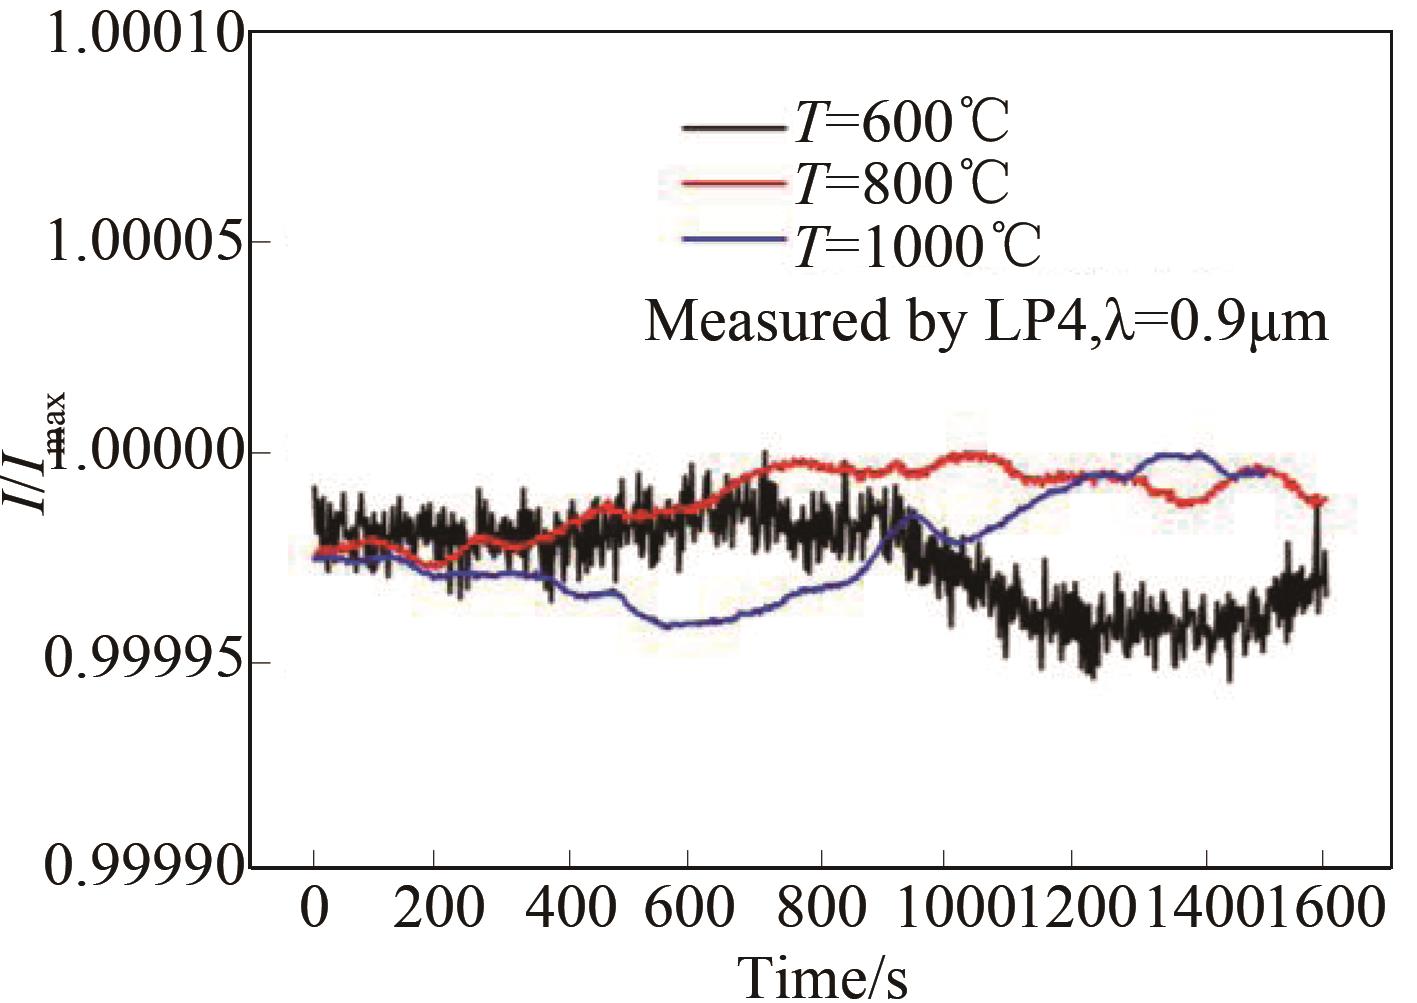 Drift characteristic of the blackbody radiation source measured by LP4